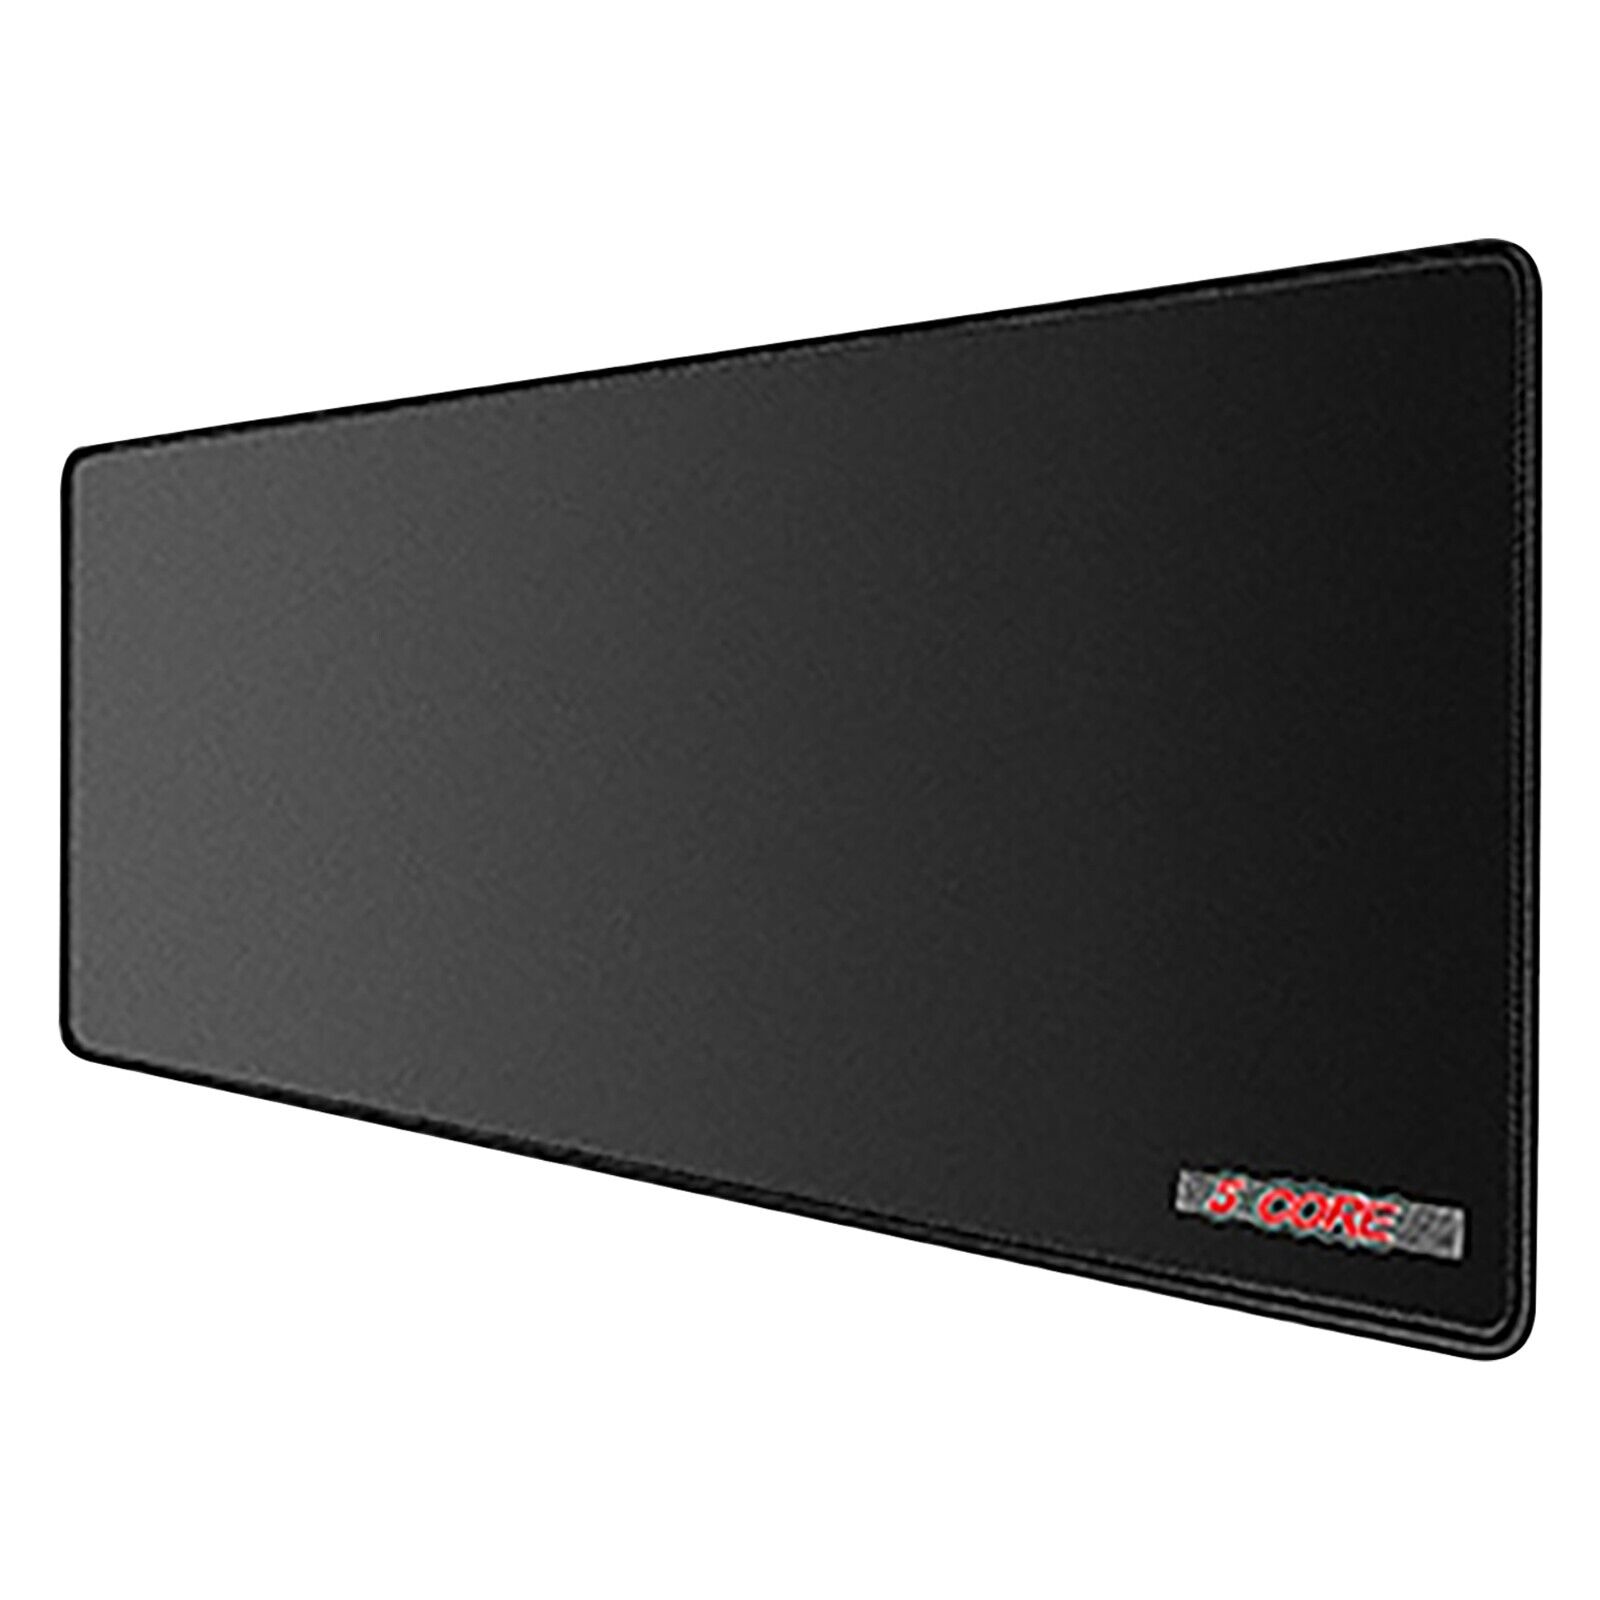 5 Core Large Gaming Mouse Pad Extended Mouse Mat with Stitched Edges Durable